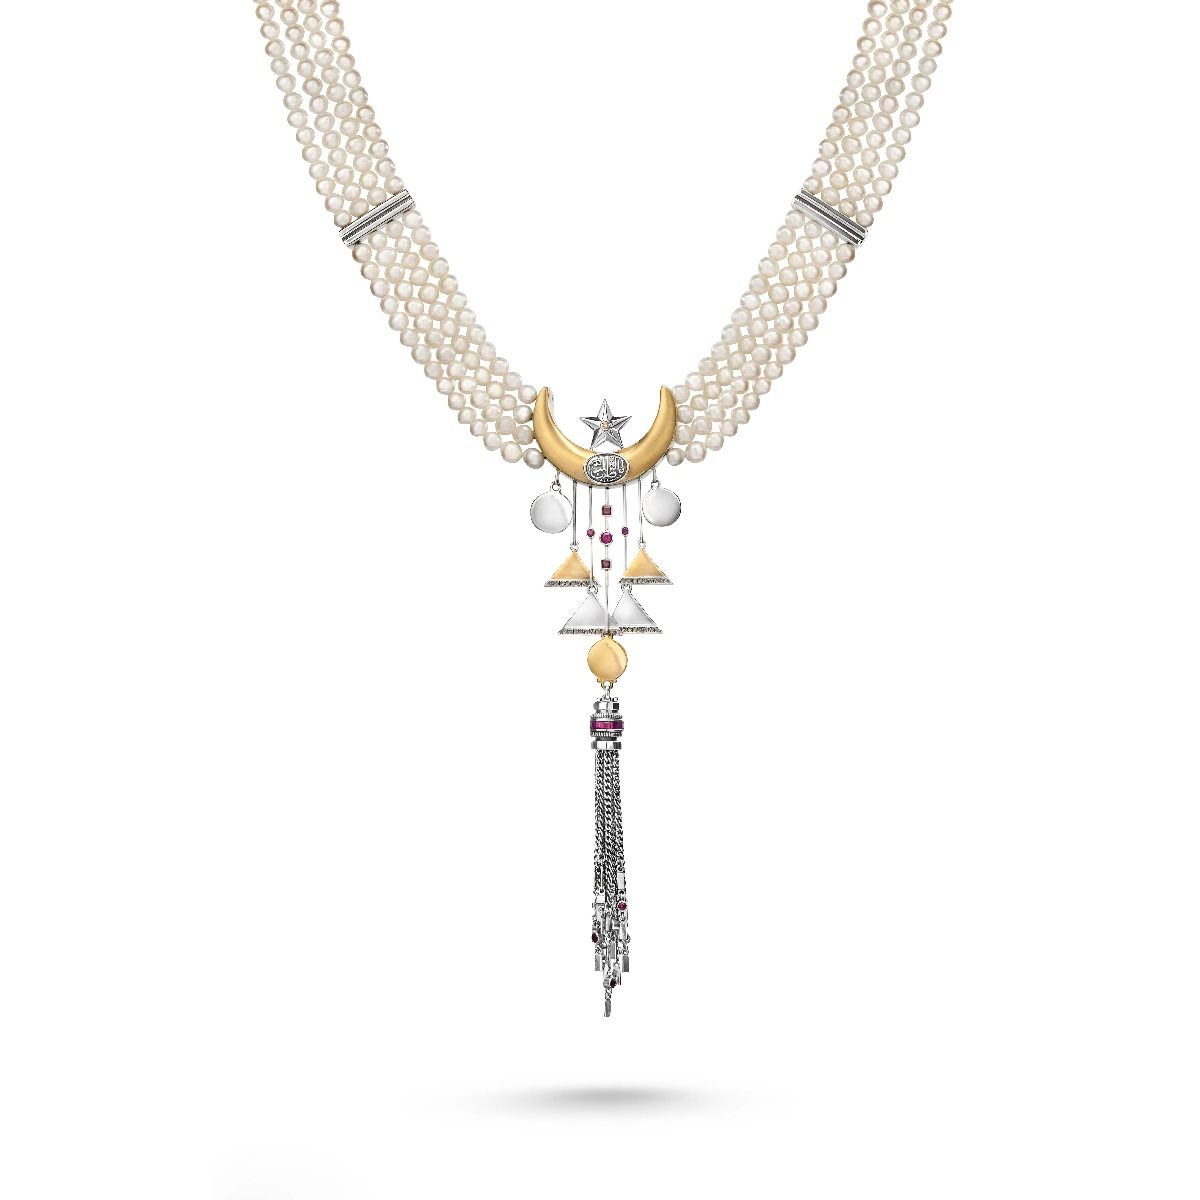 Beaded Crescent Necklace by Azza Fahmy - Designer Necklaces